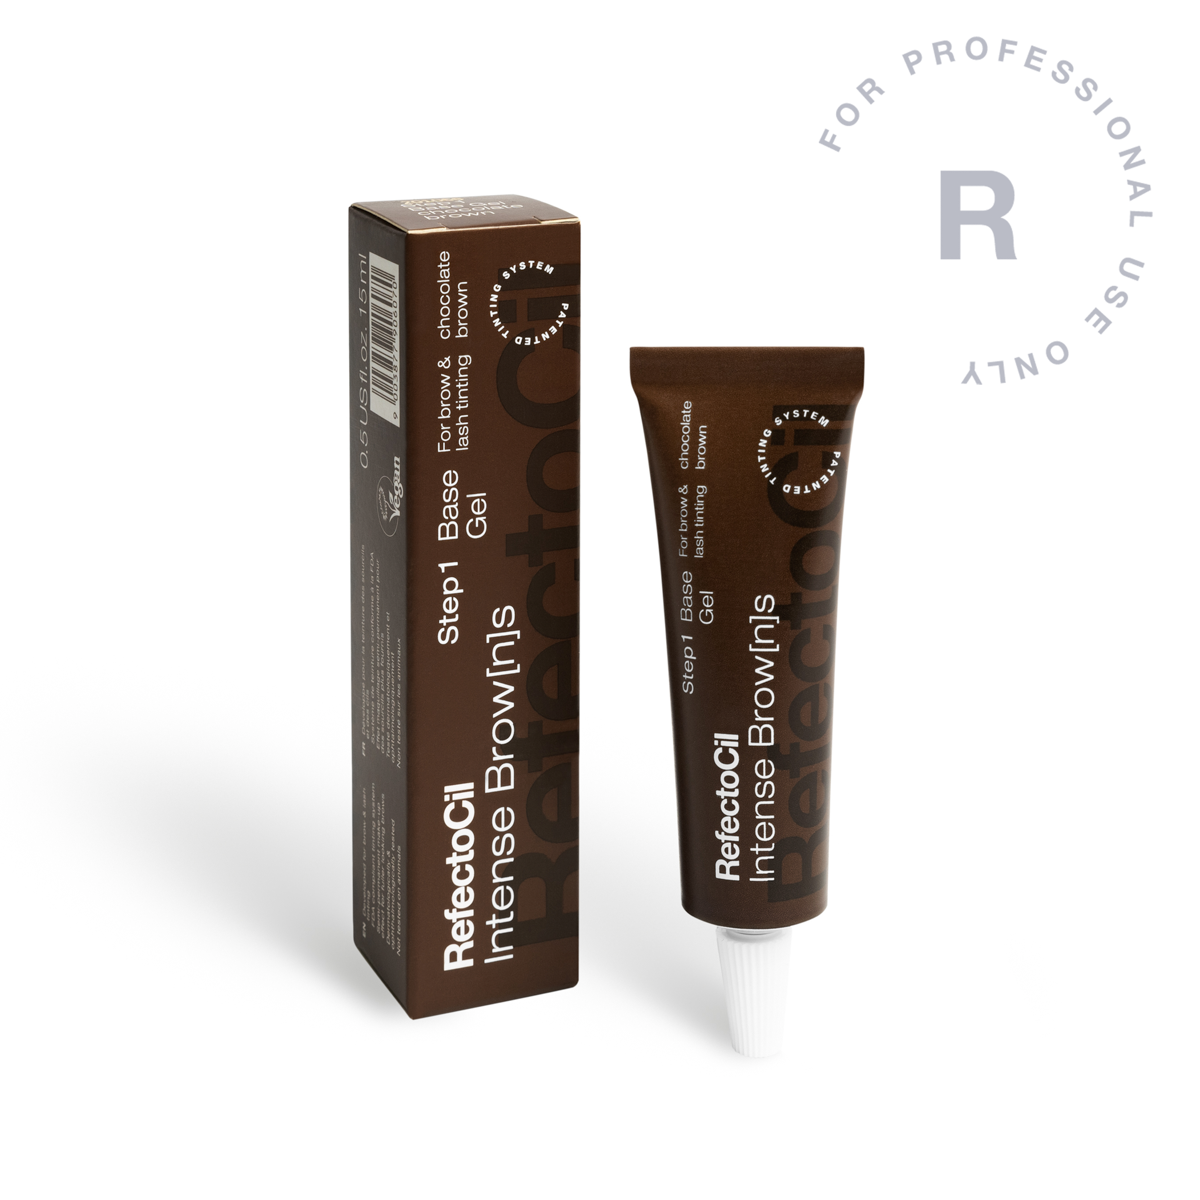 Refectocil Intense Brow(n)s